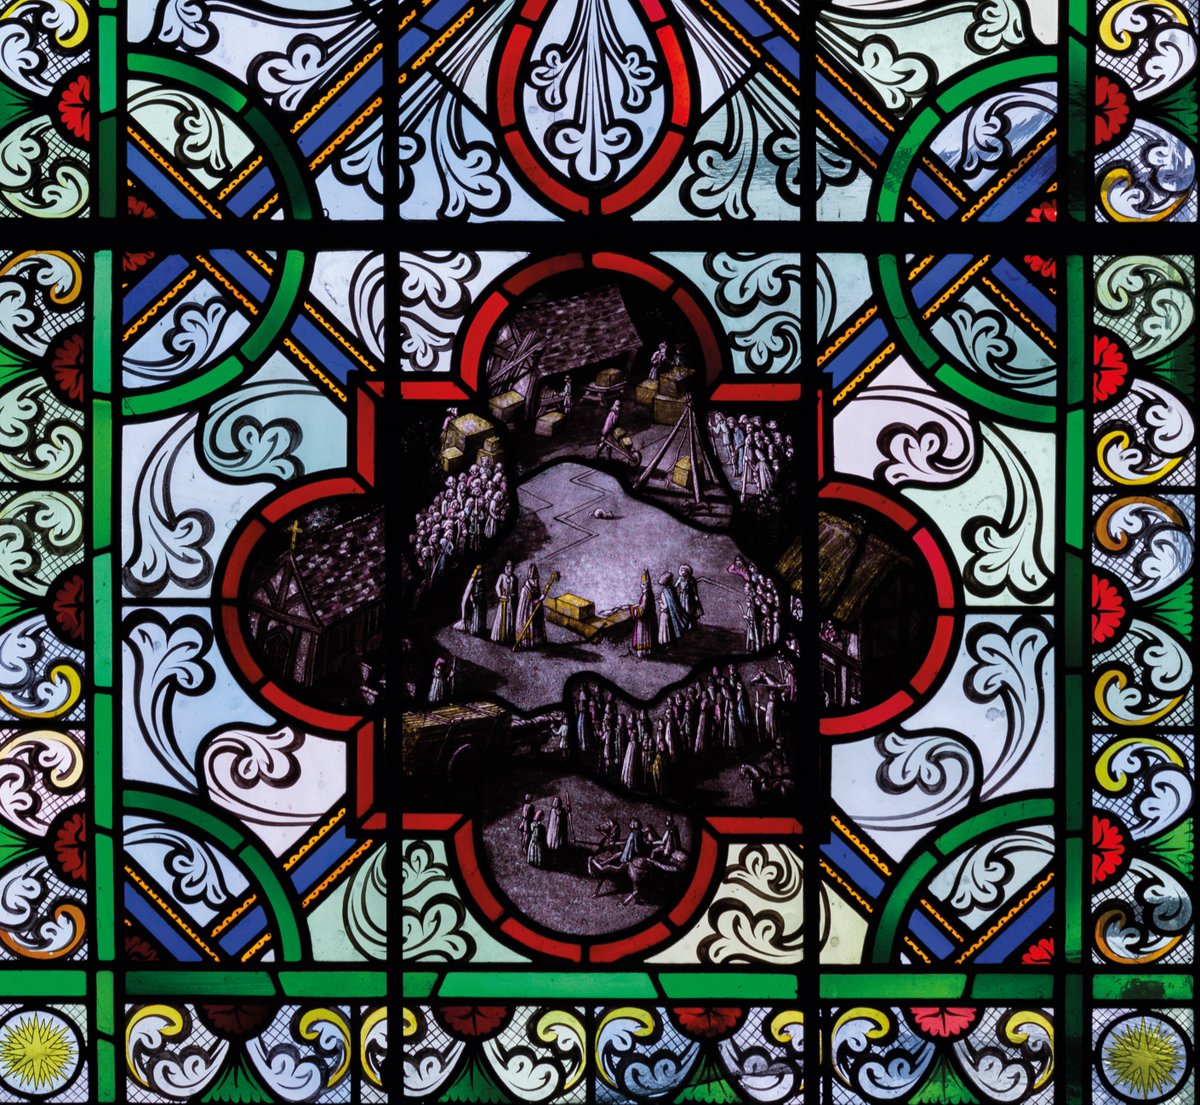 #Onthisday 804 years ago, Salisbury Cathedral’s foundation stones were laid. Depicted here is the foundation ceremony in stained glass. 📷: Declan Spreadbury